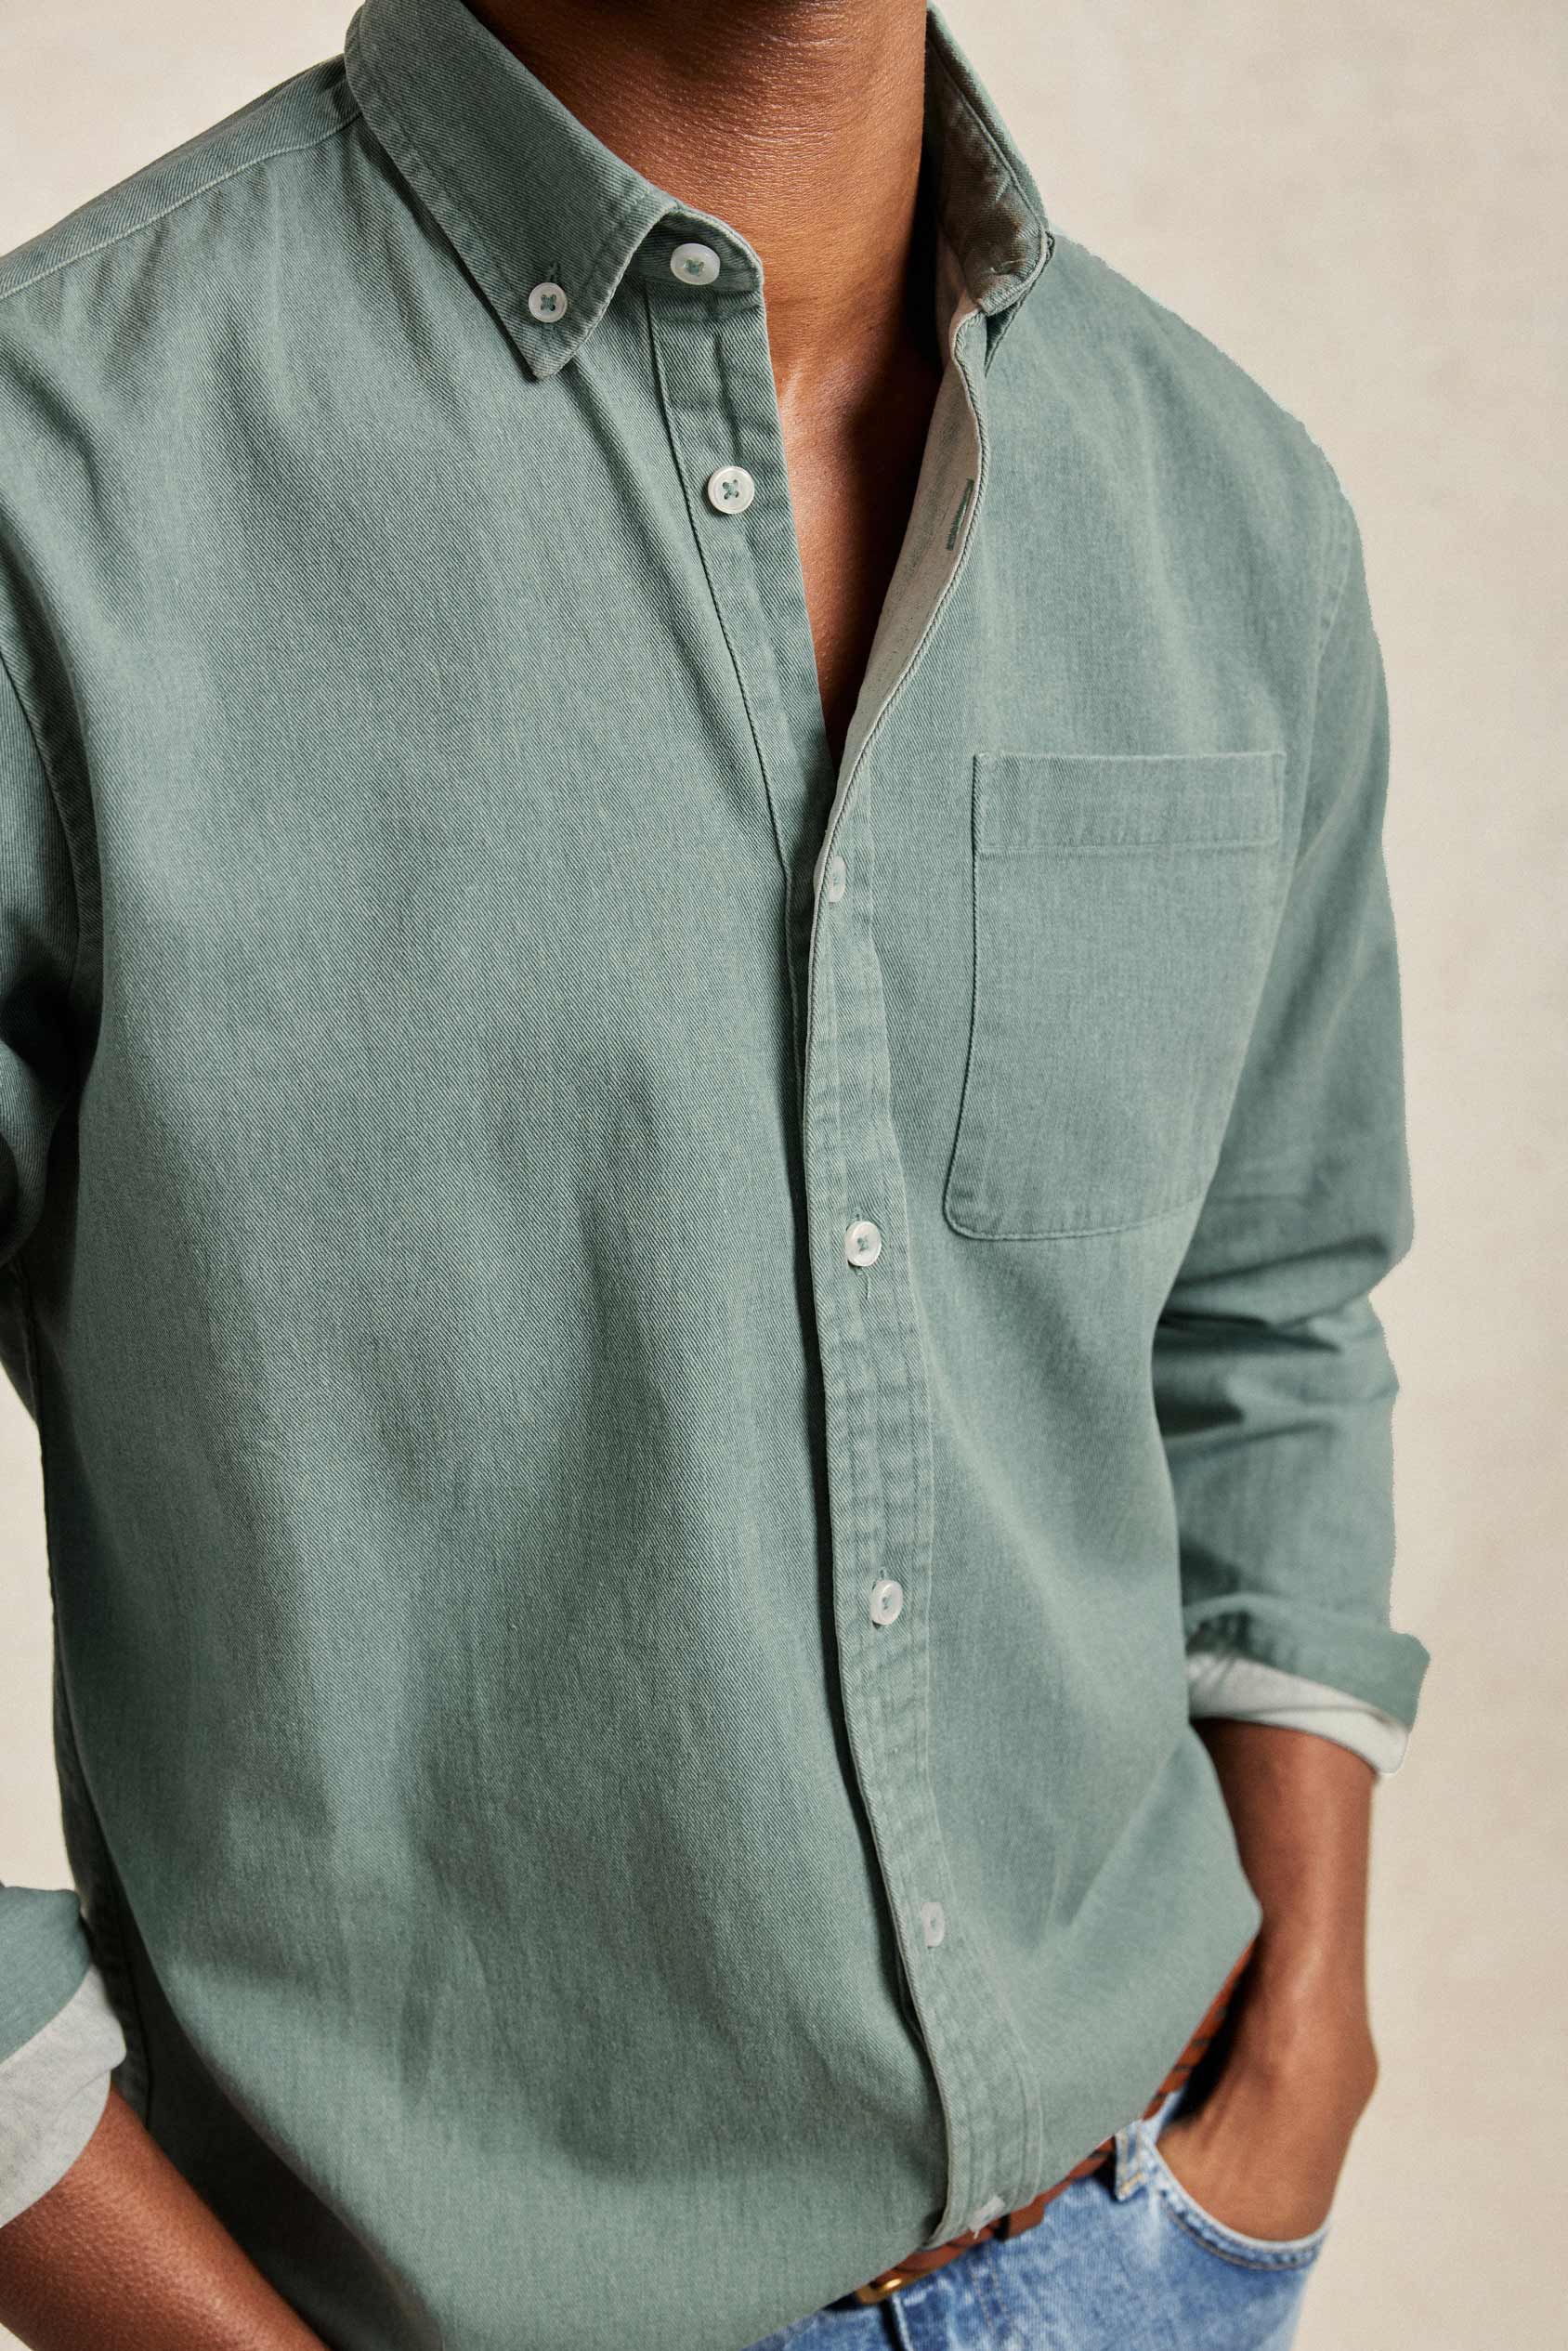 Emerald green men’s twill shirt with button down collar and printed colour finish. 100% Cotton. Cut from vintage-wash cotton twill to a classic Beaufort fit. Casual wear. Machine wash. Size S, M, L, XL, XXL.